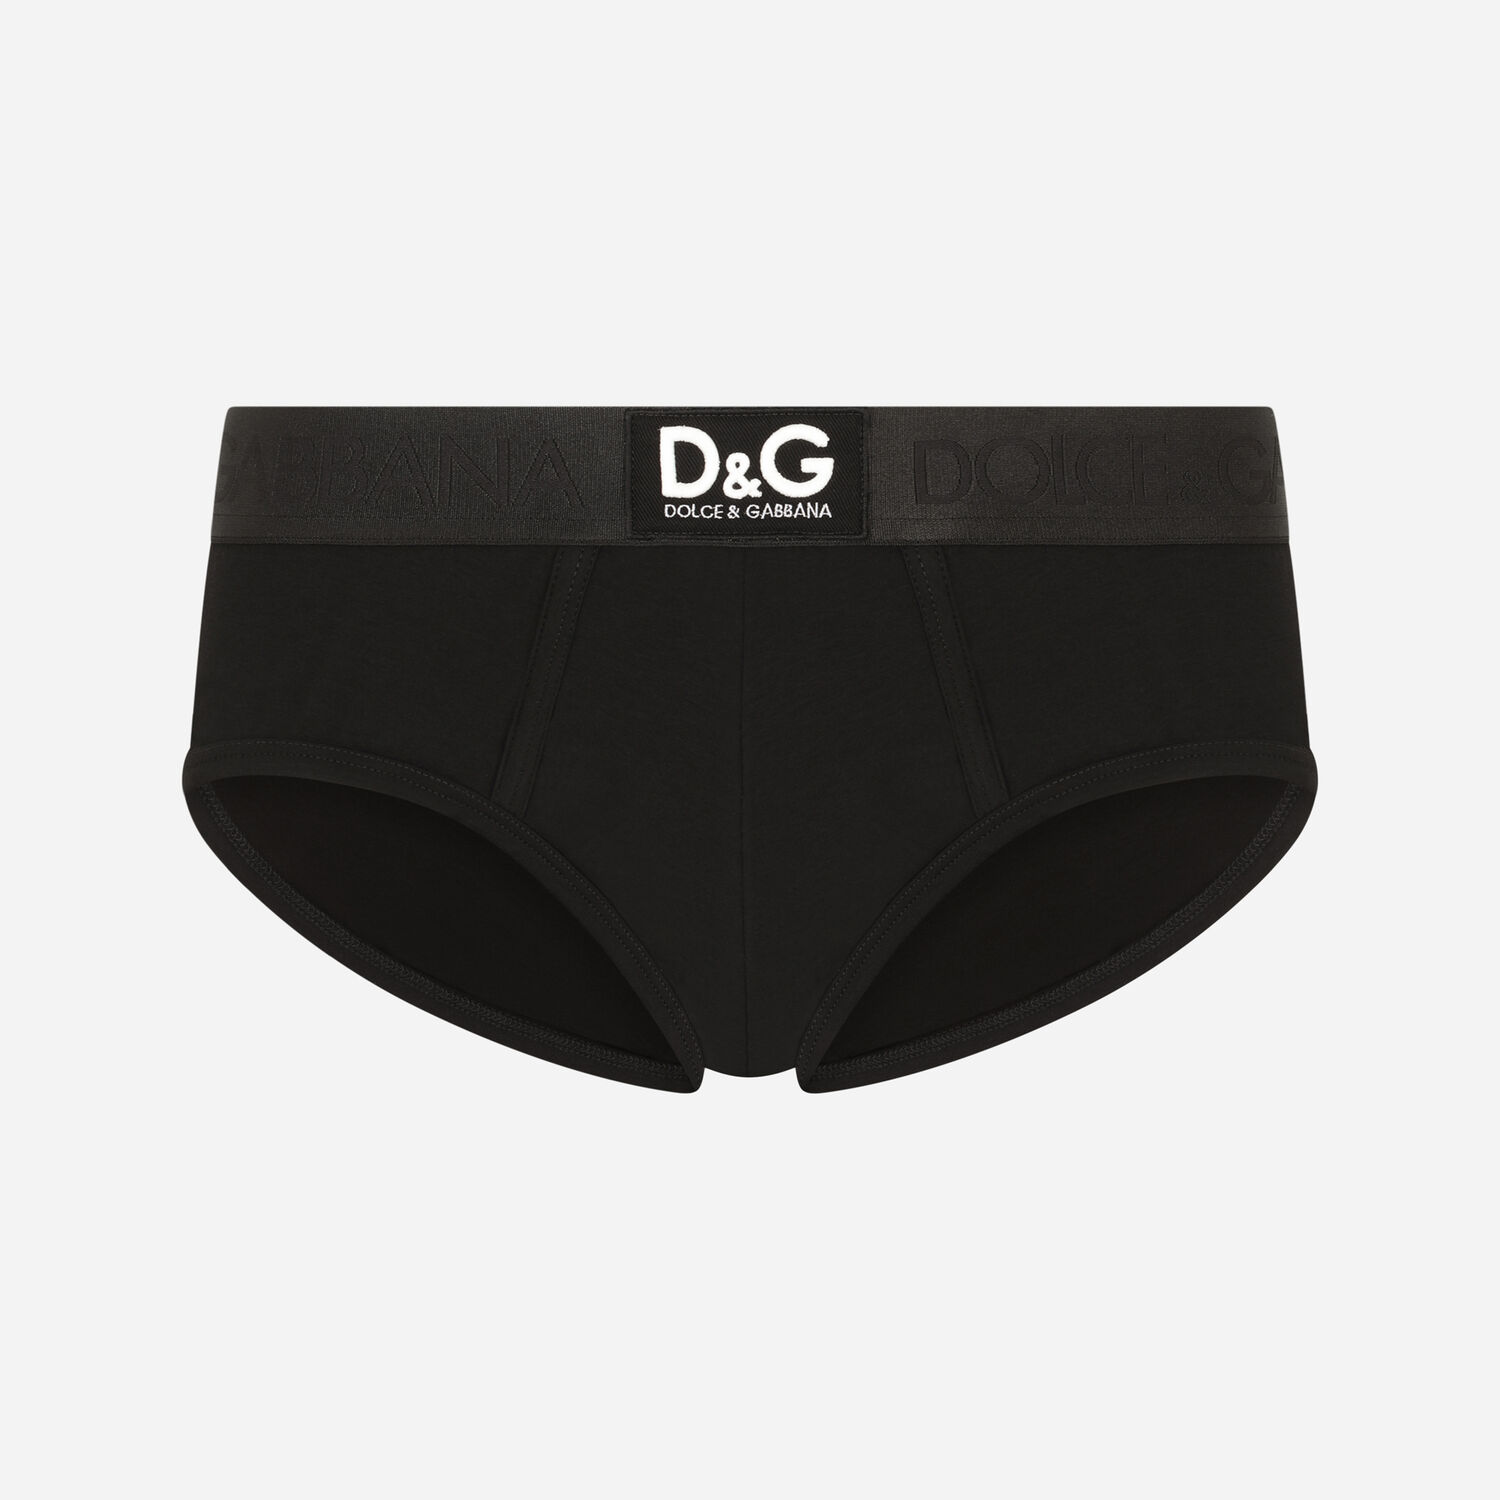 Two-way stretch cotton Brando briefs with DG patch in Black for Men